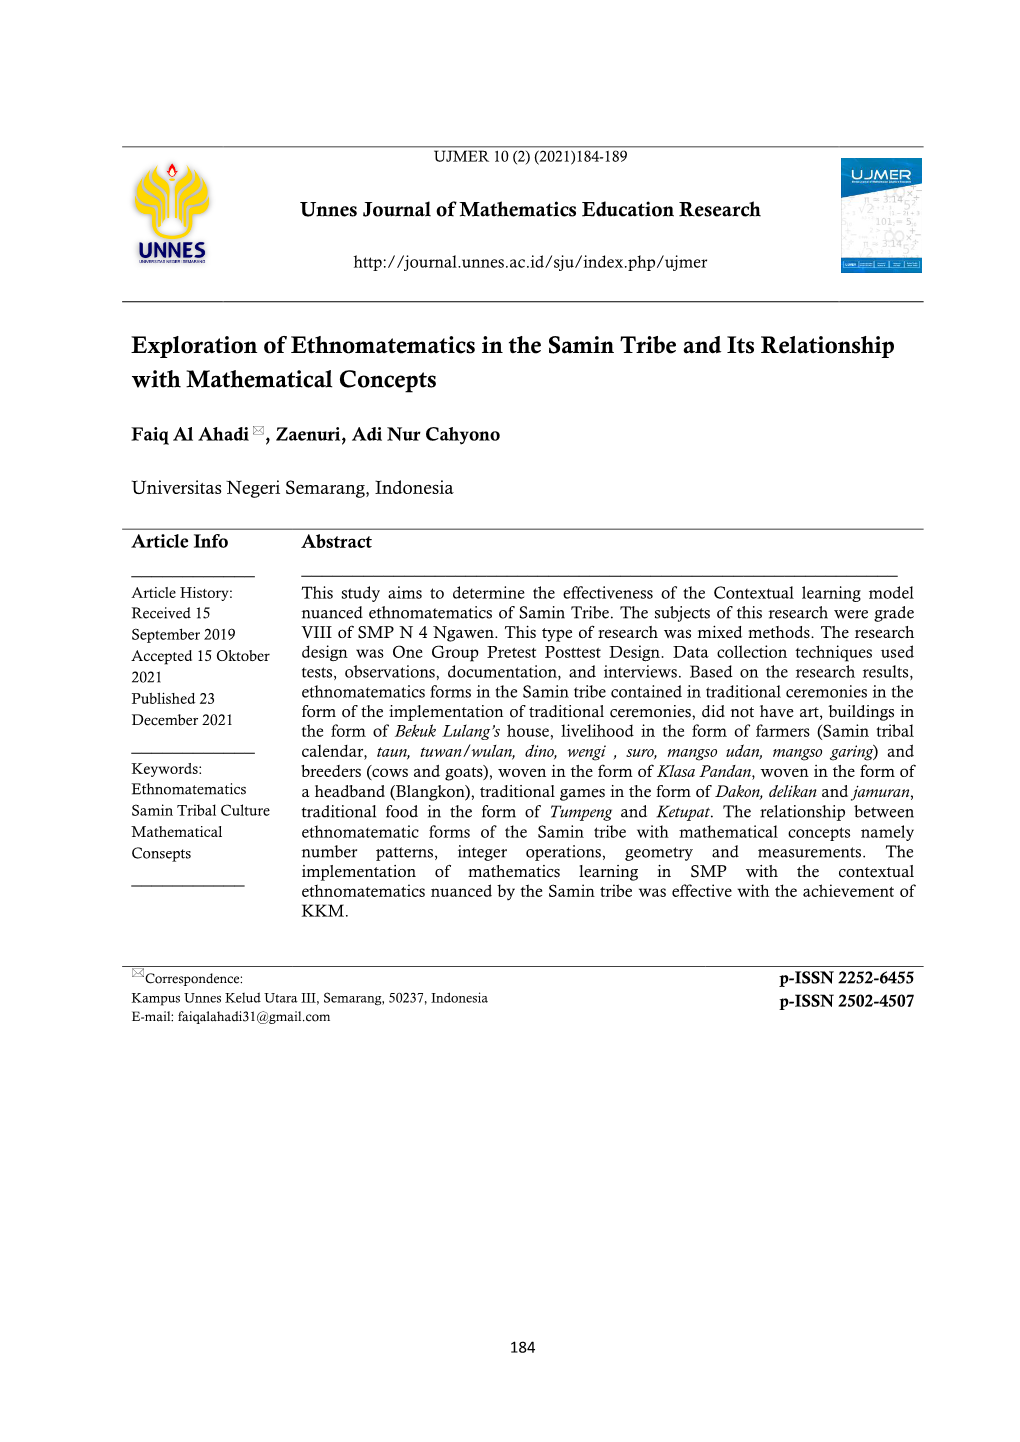 Exploration of Ethnomatematics in the Samin Tribe and Its Relationship with Mathematical Concepts